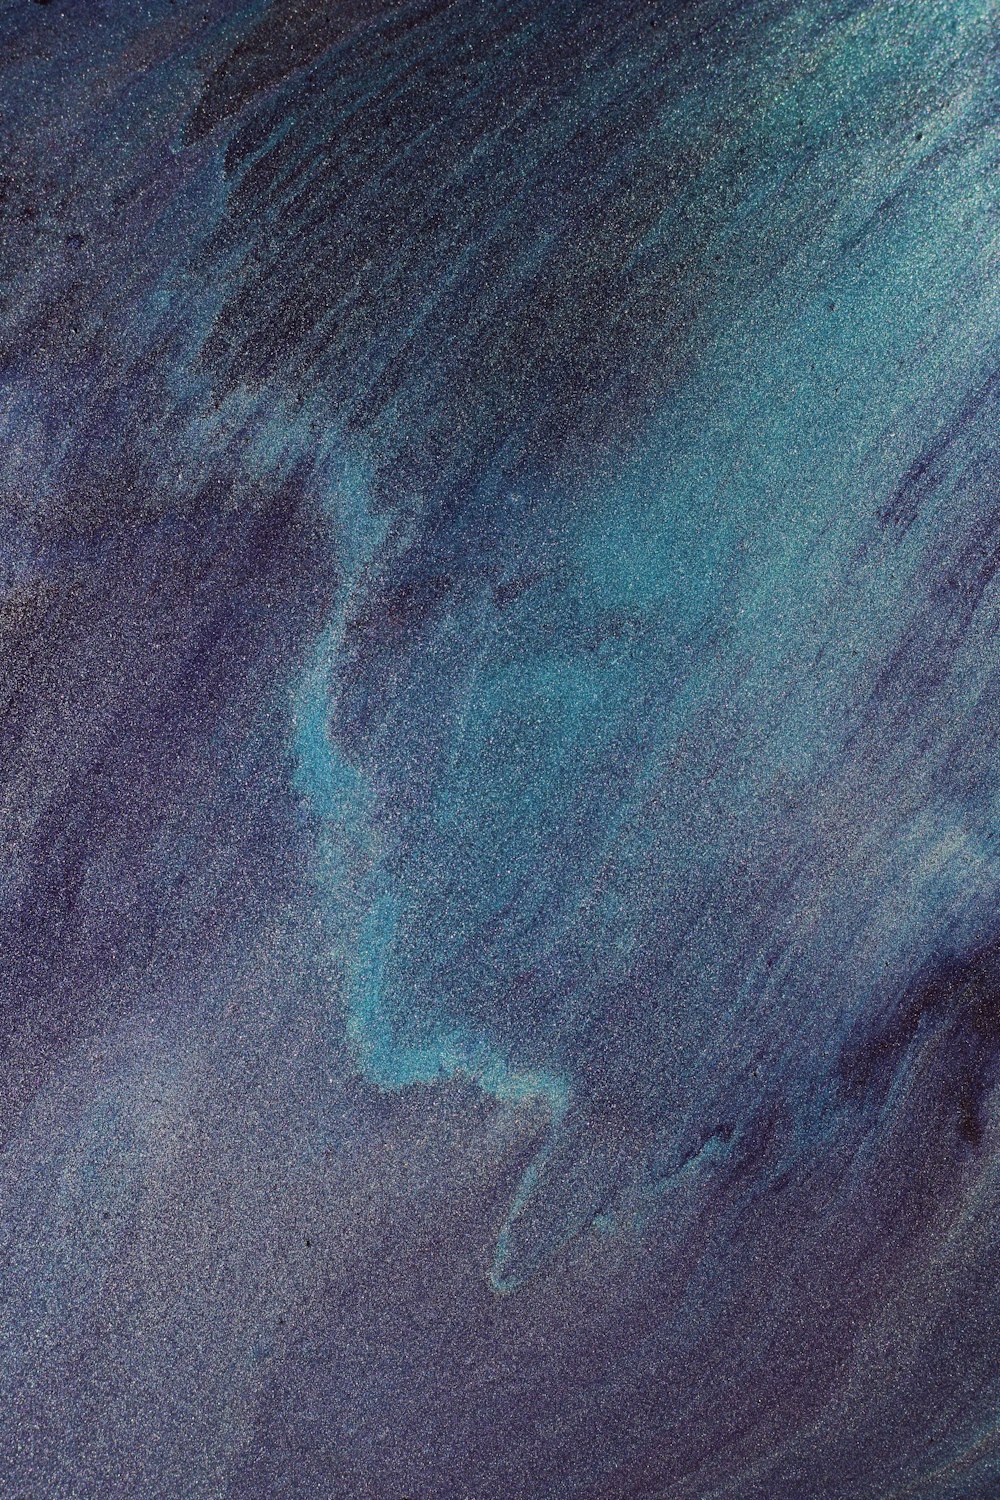 a close up of a blue and purple substance